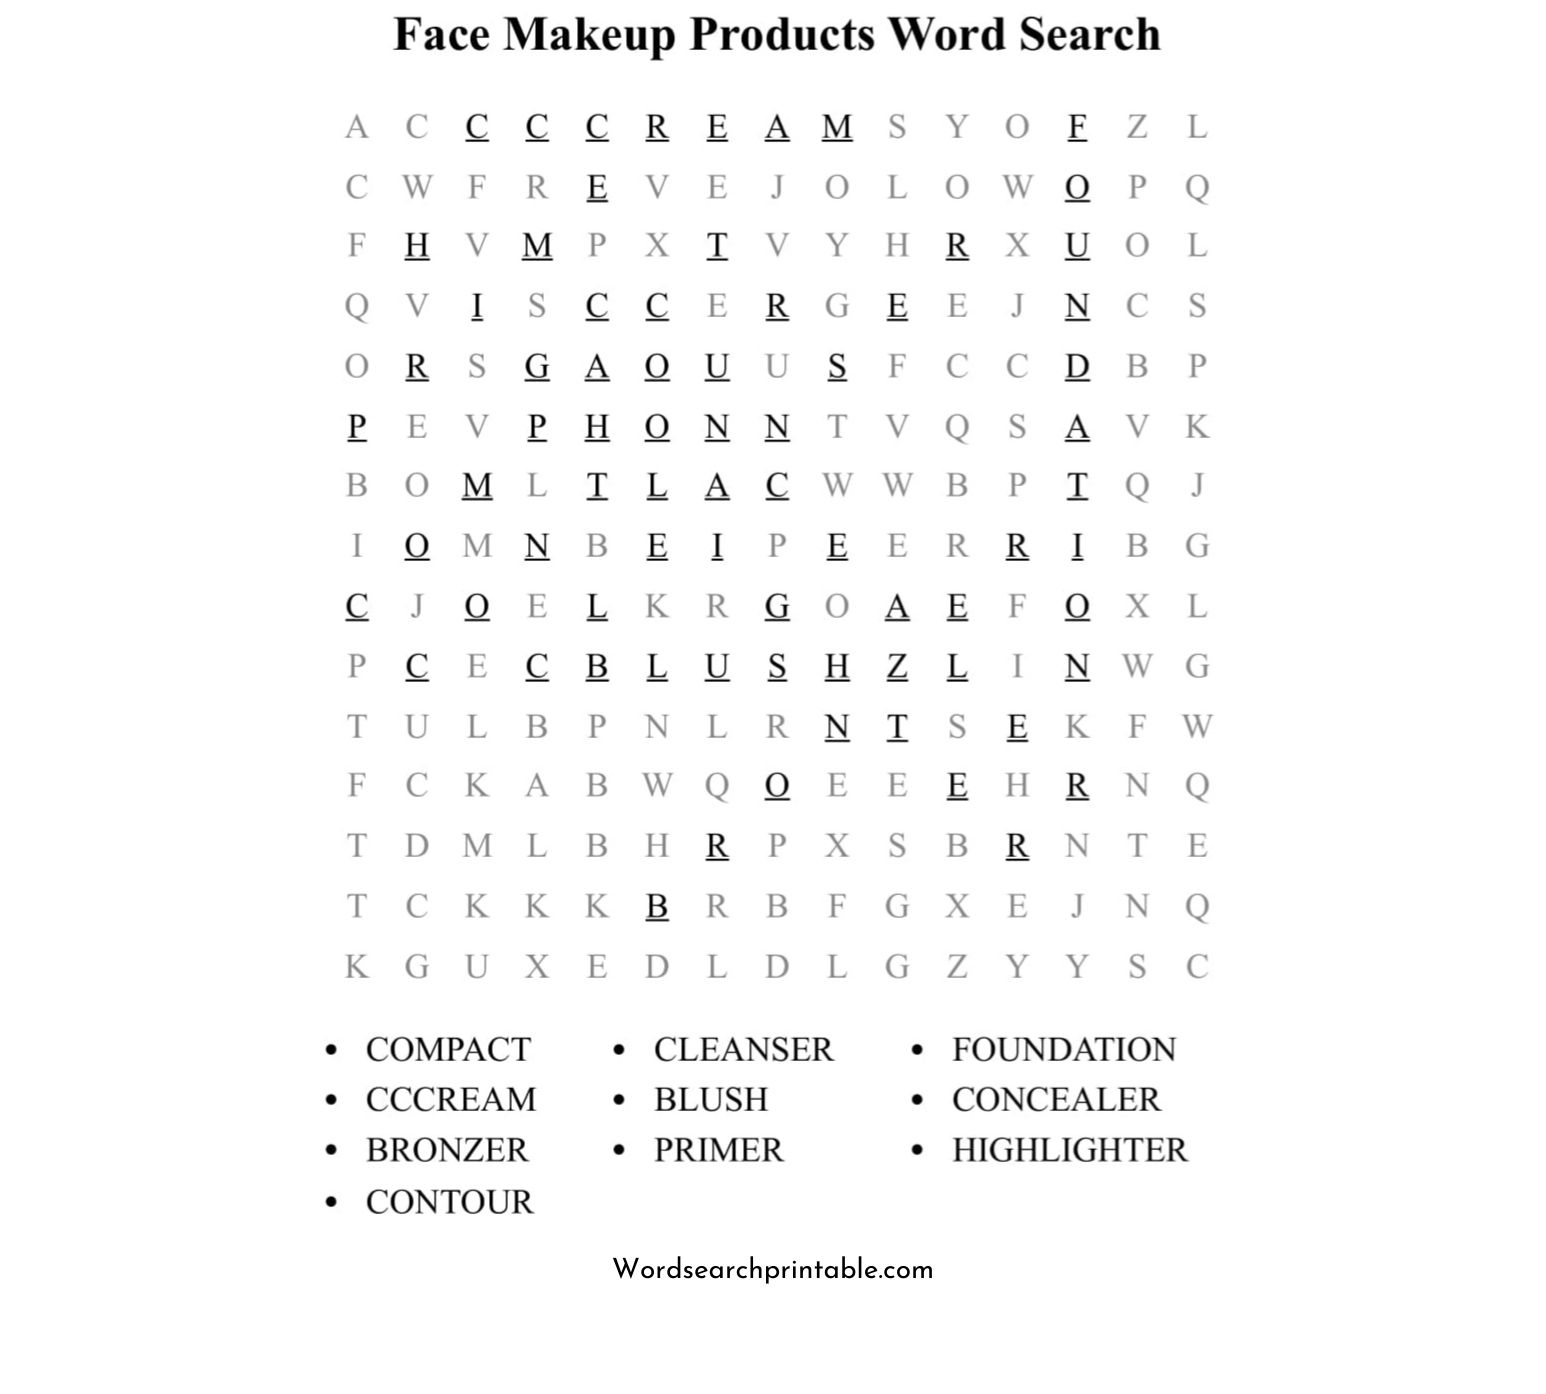 face makeup products word search puzzle solution